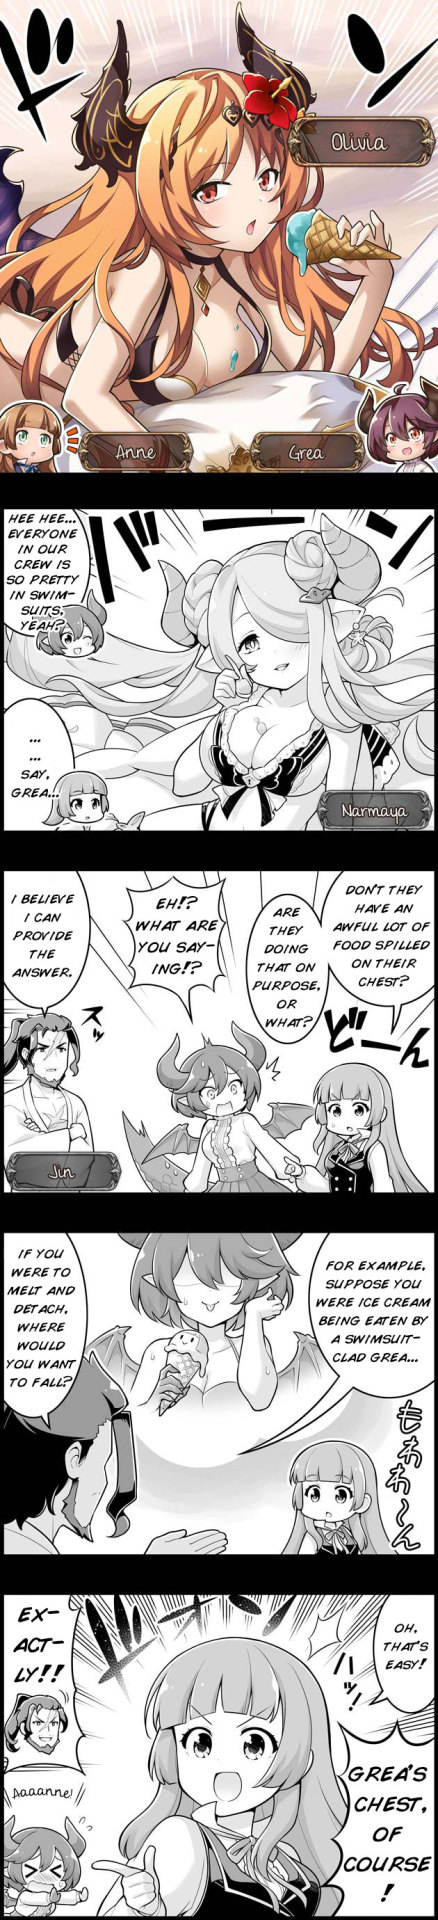 Grand Blues! Chapter 1112: Grea Looks At Swimsuits - Picture 1